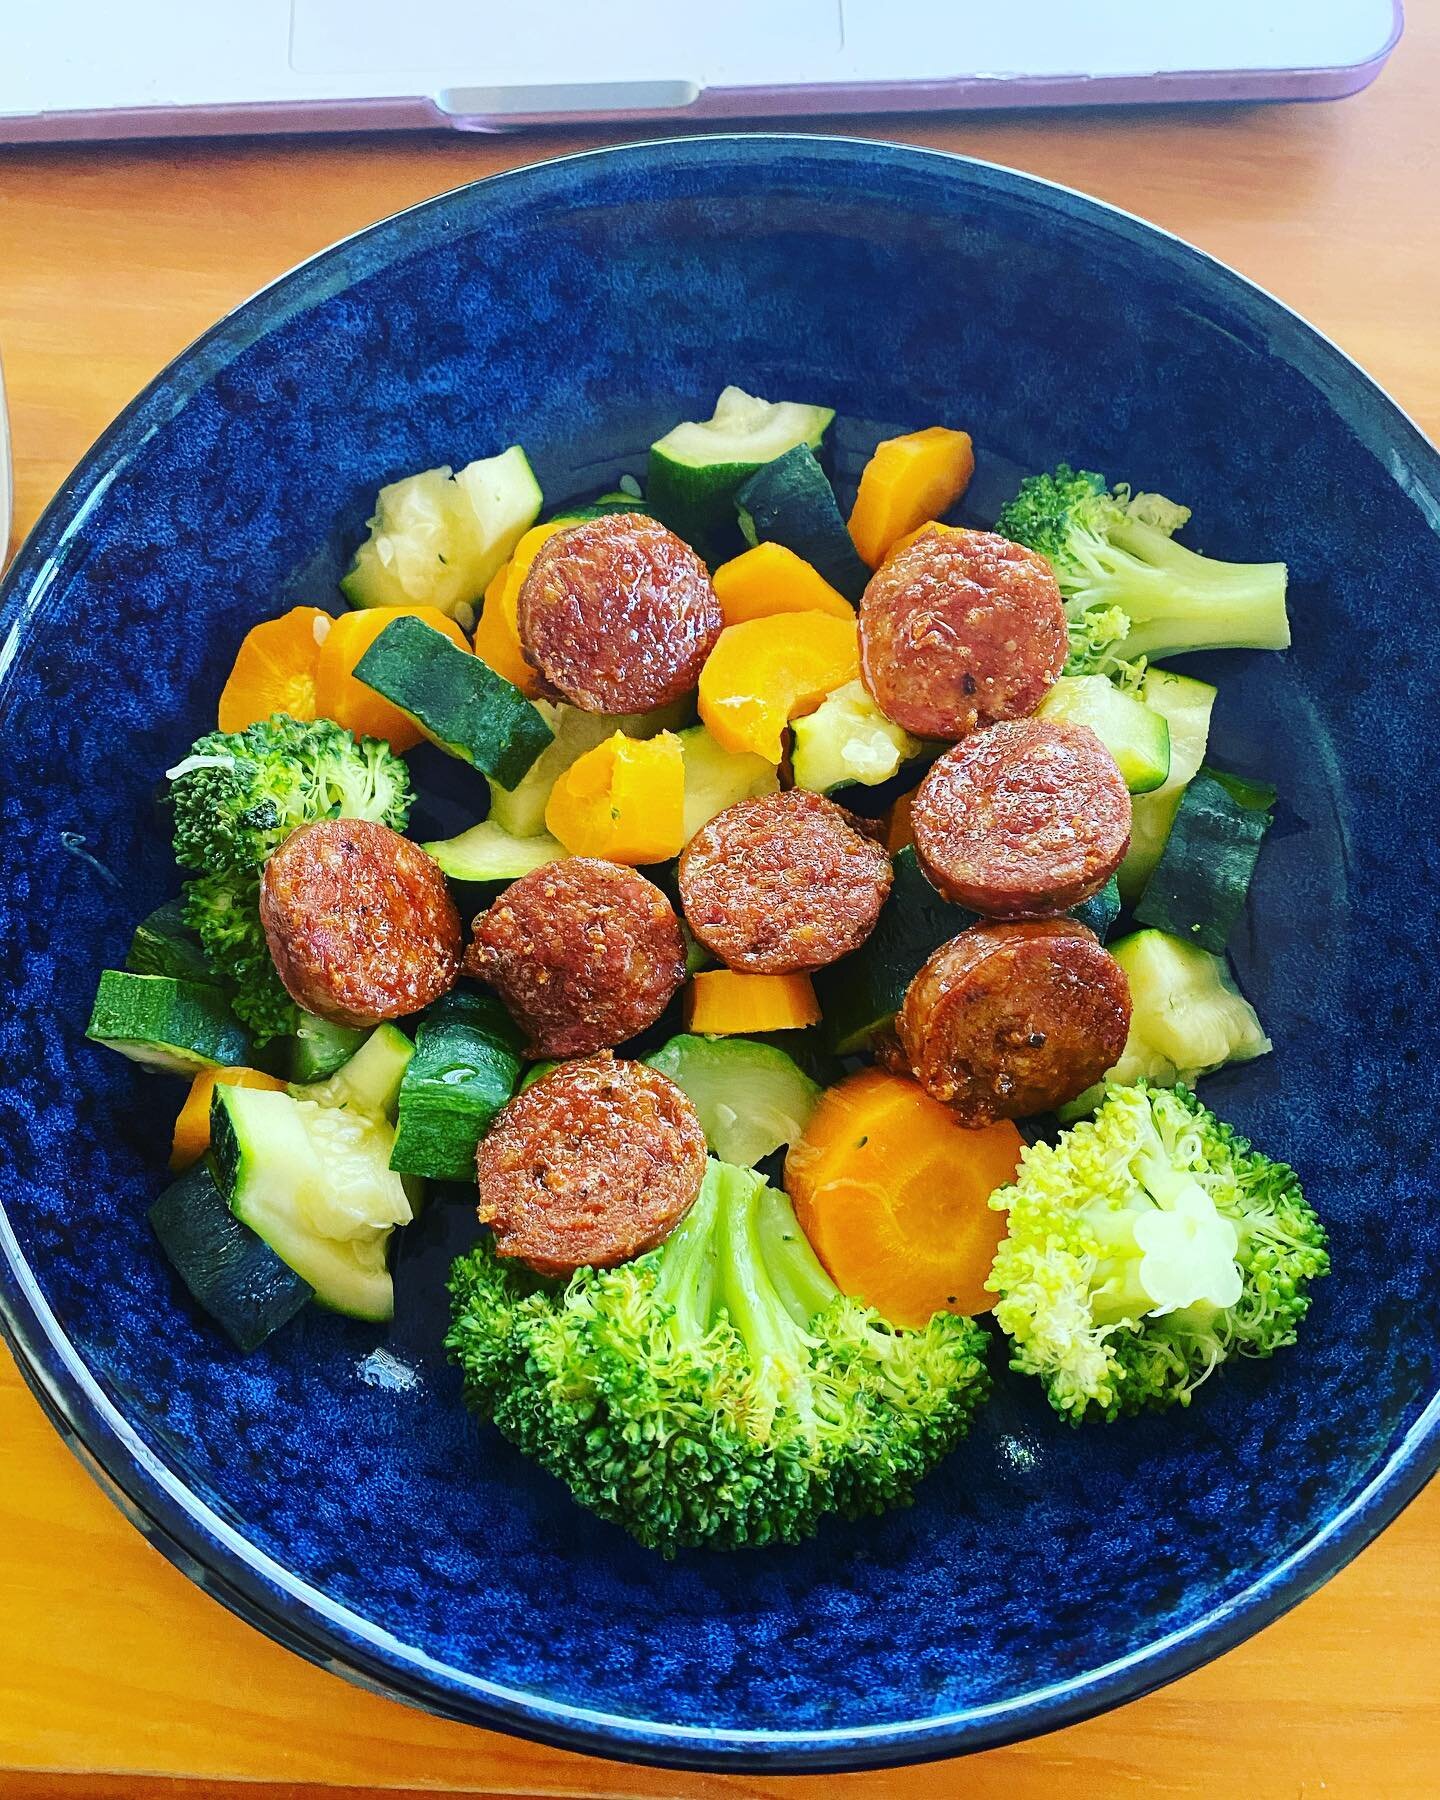 Make it simple!!

I enjoy cooking &amp; do spend time planning &amp; making my food but sometimes it just has to be quick but still healthy! 

Today I didn&rsquo;t plan &amp; didn&rsquo;t have much time so just steamed some carrots, broccoli &amp; zu